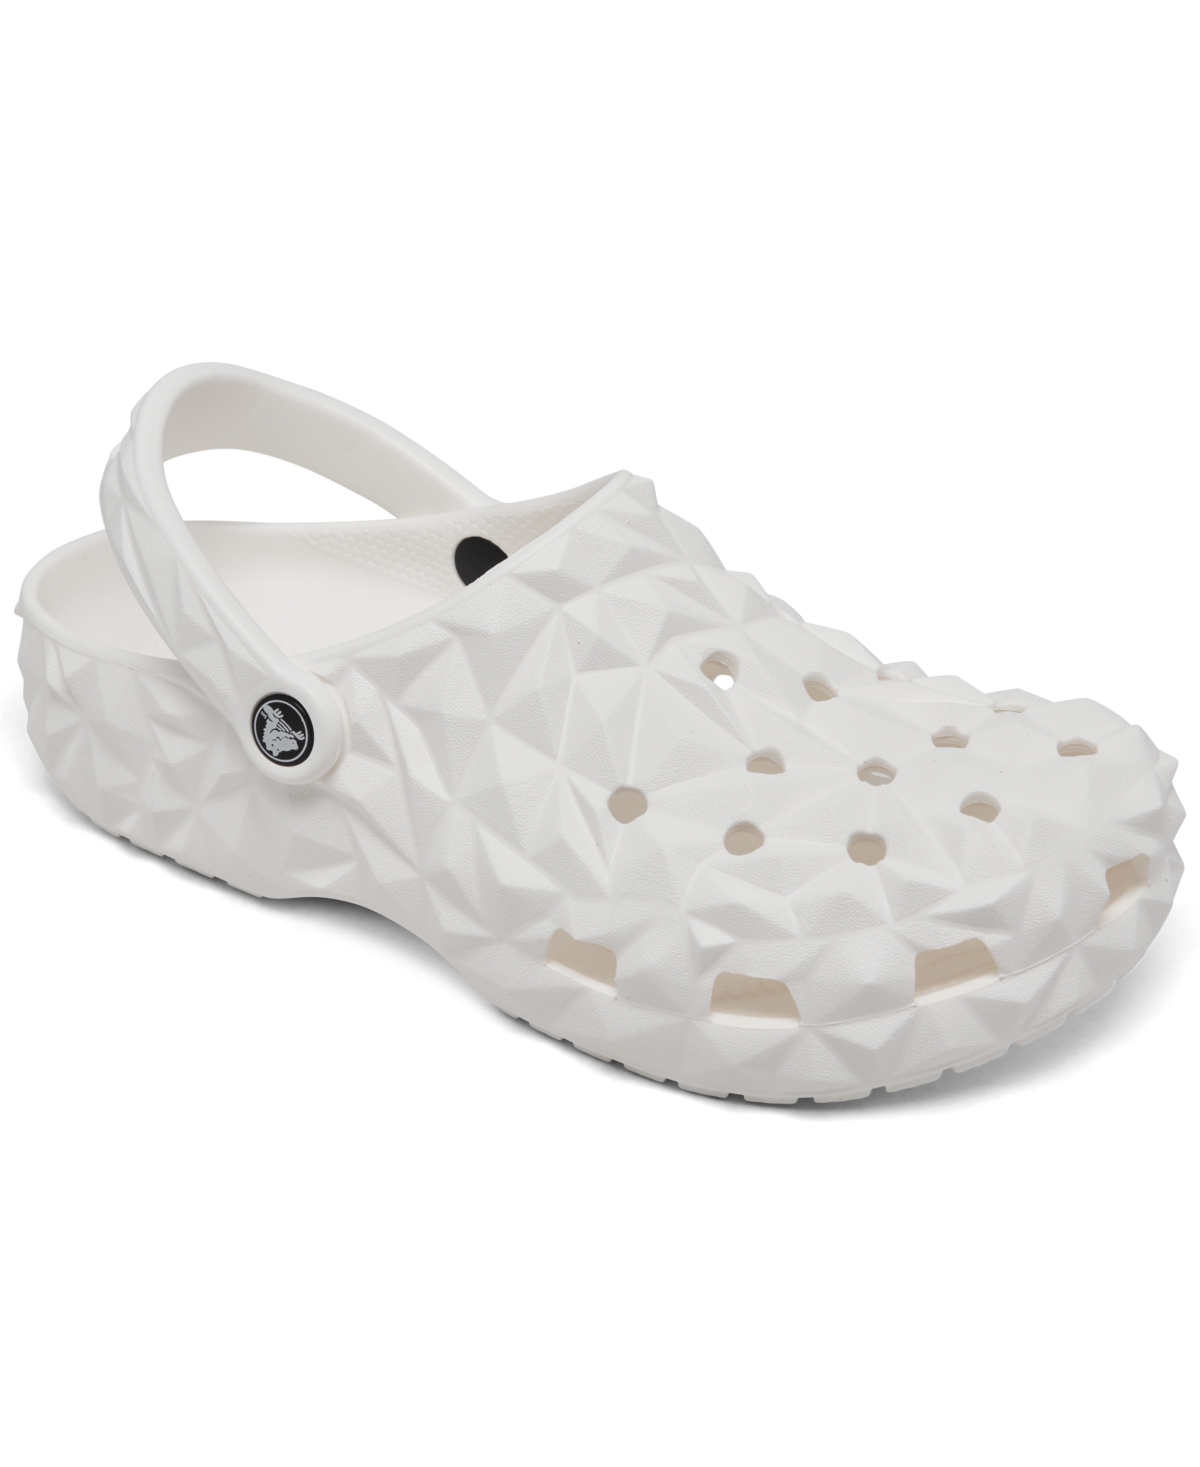 Men's and Women's Classic Geometric Clogs from Finish Line - White